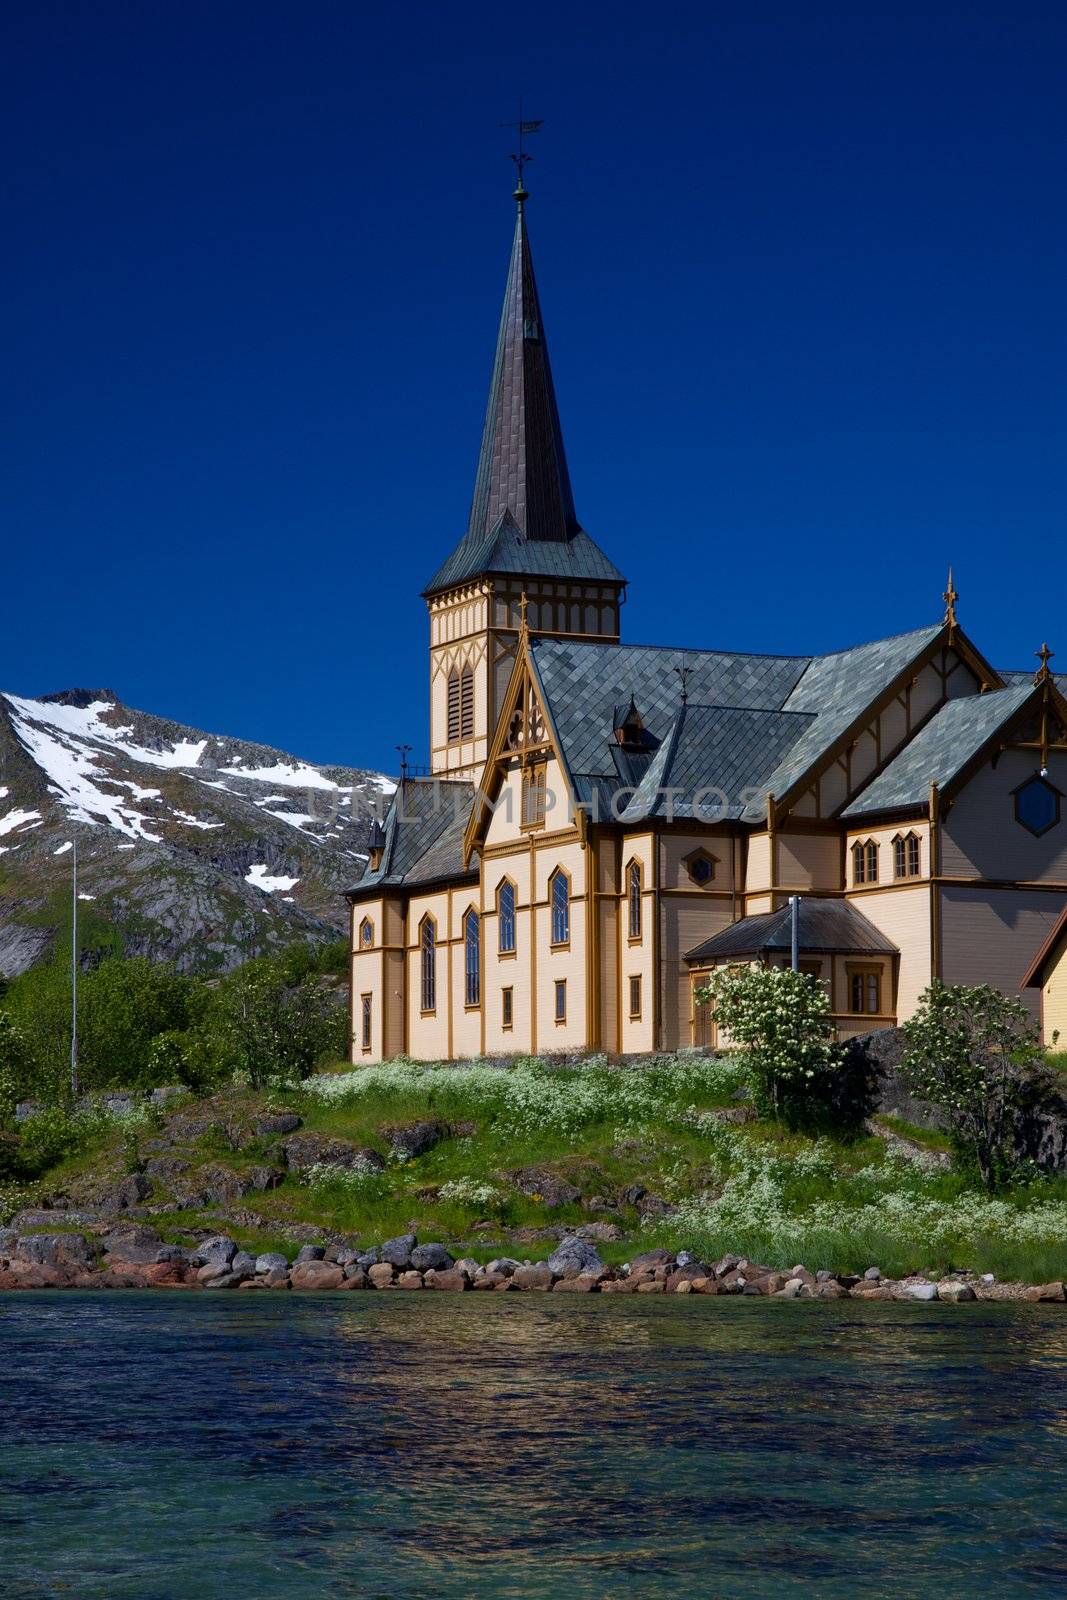 Picturesque Lofoten cathedral on Lofoten islands in Norway with snowy peaks in the background